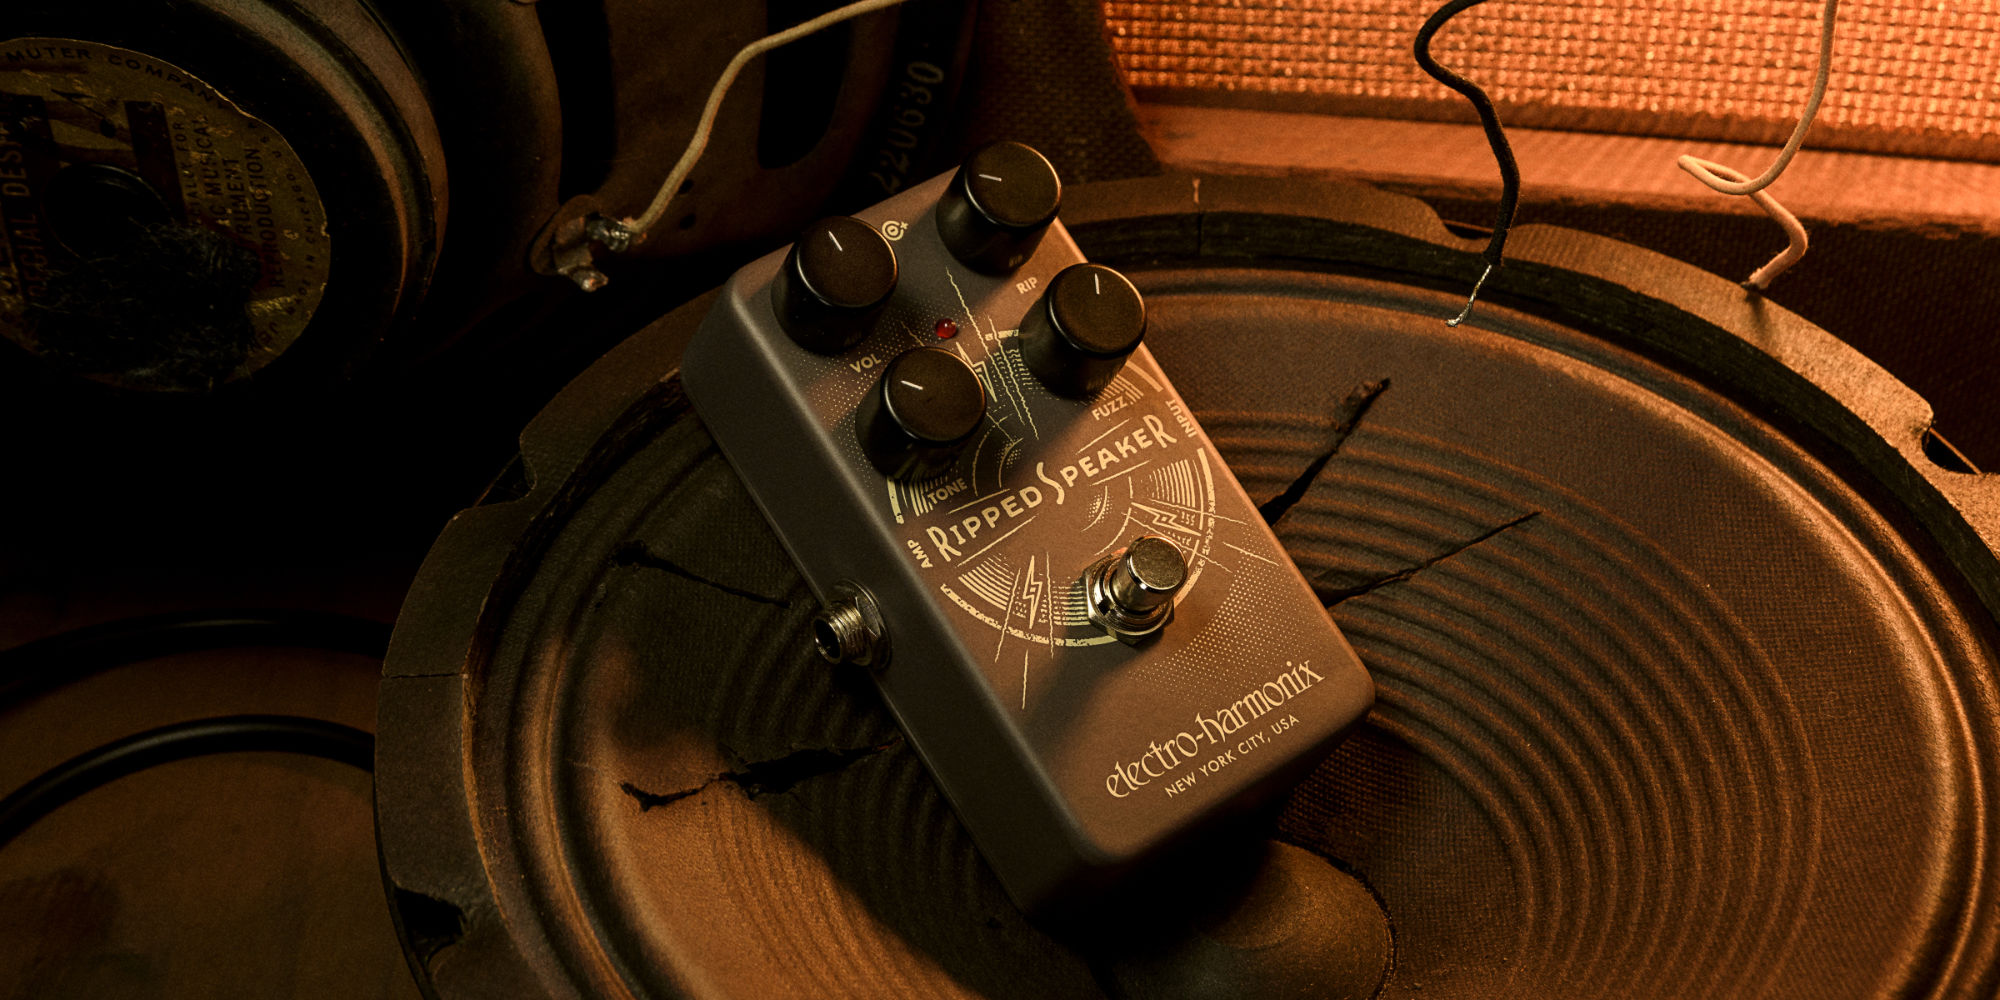 Mer information om "Electro-Harmonix introduces the Ripped Speaker Fuzz Pedal"